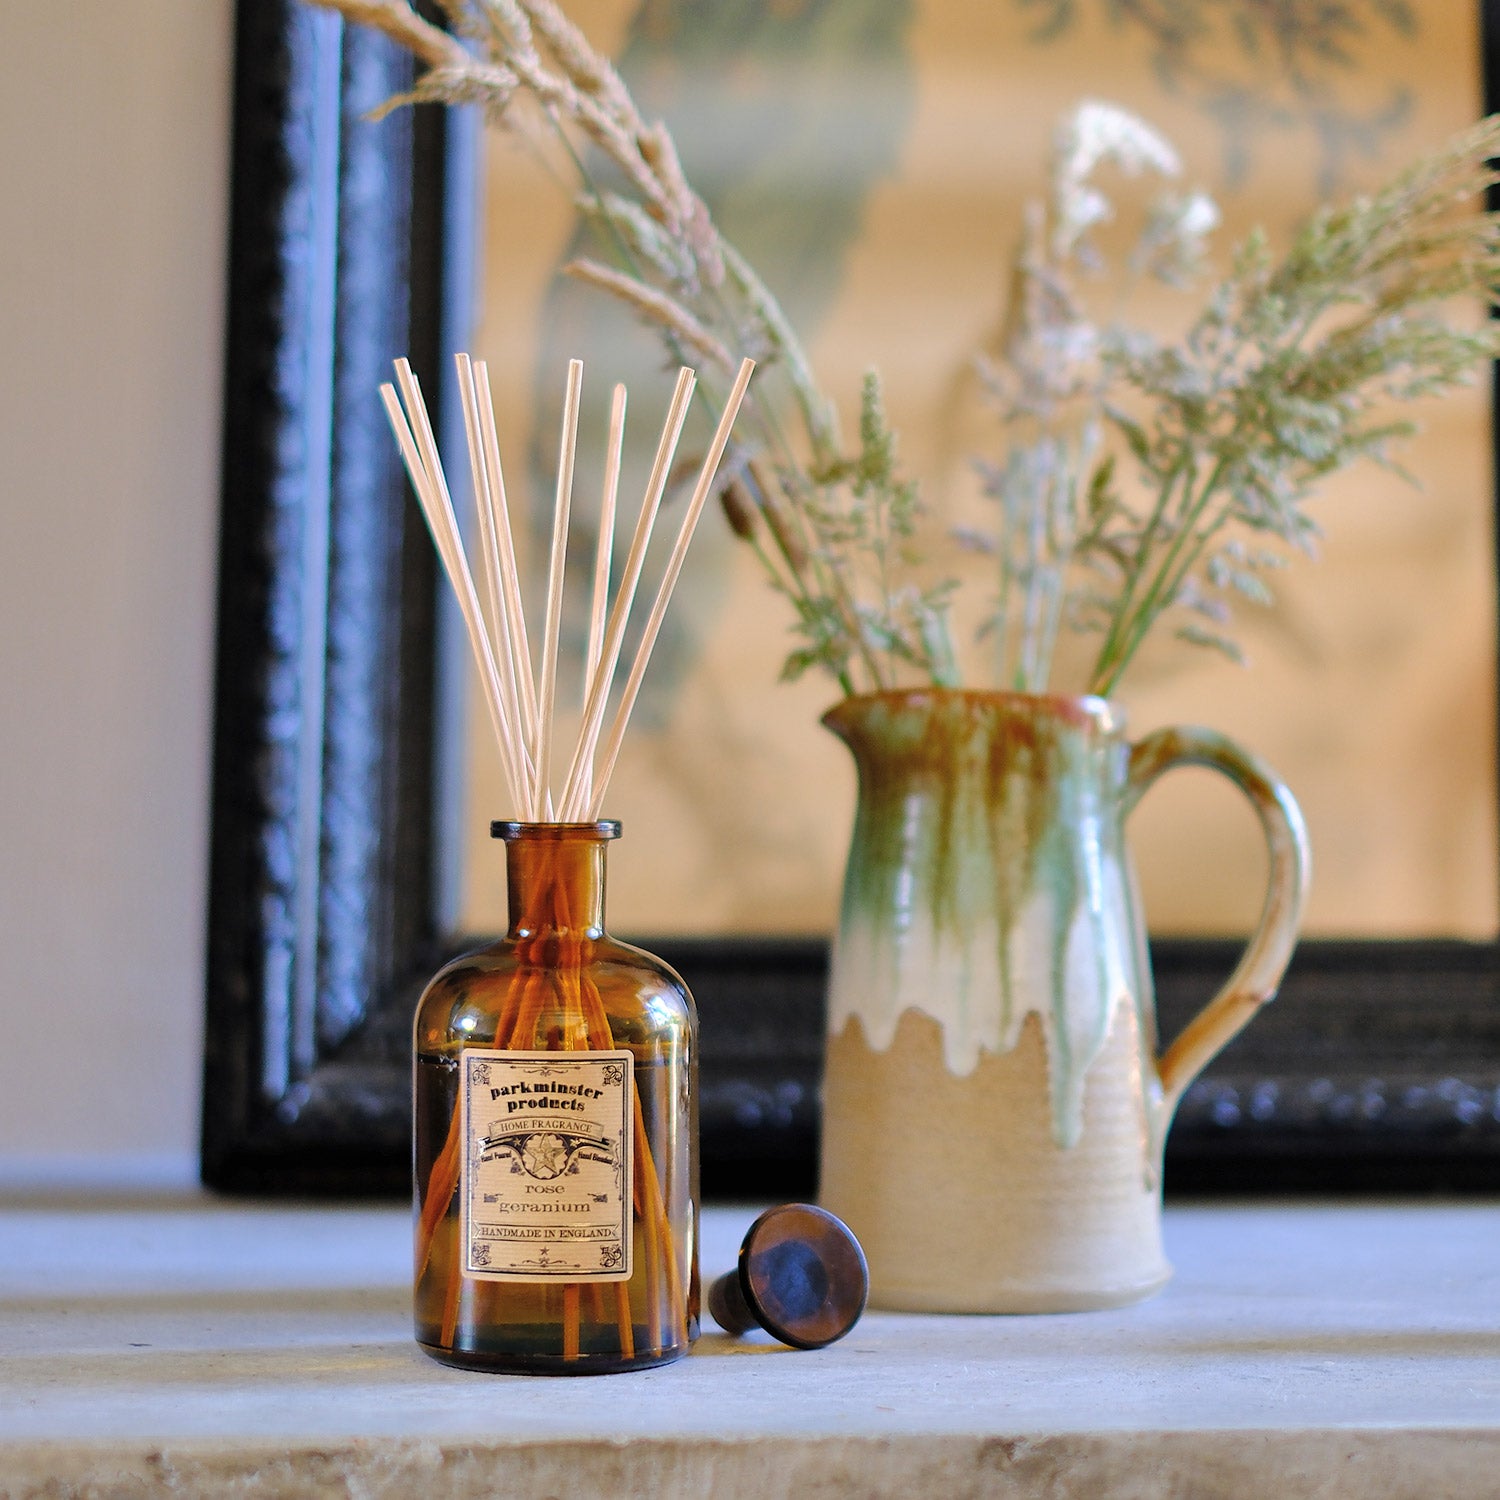 Indulge in the pure and natural scent of Rose Geranium with Parkminster's 200ml amber glass Apothecary Reed Diffuser. Created in our Cornish workshop using 100% plant-based ingredients, this diffuser provides a stylish and eco-friendly way to freshen your home without any chemical odours